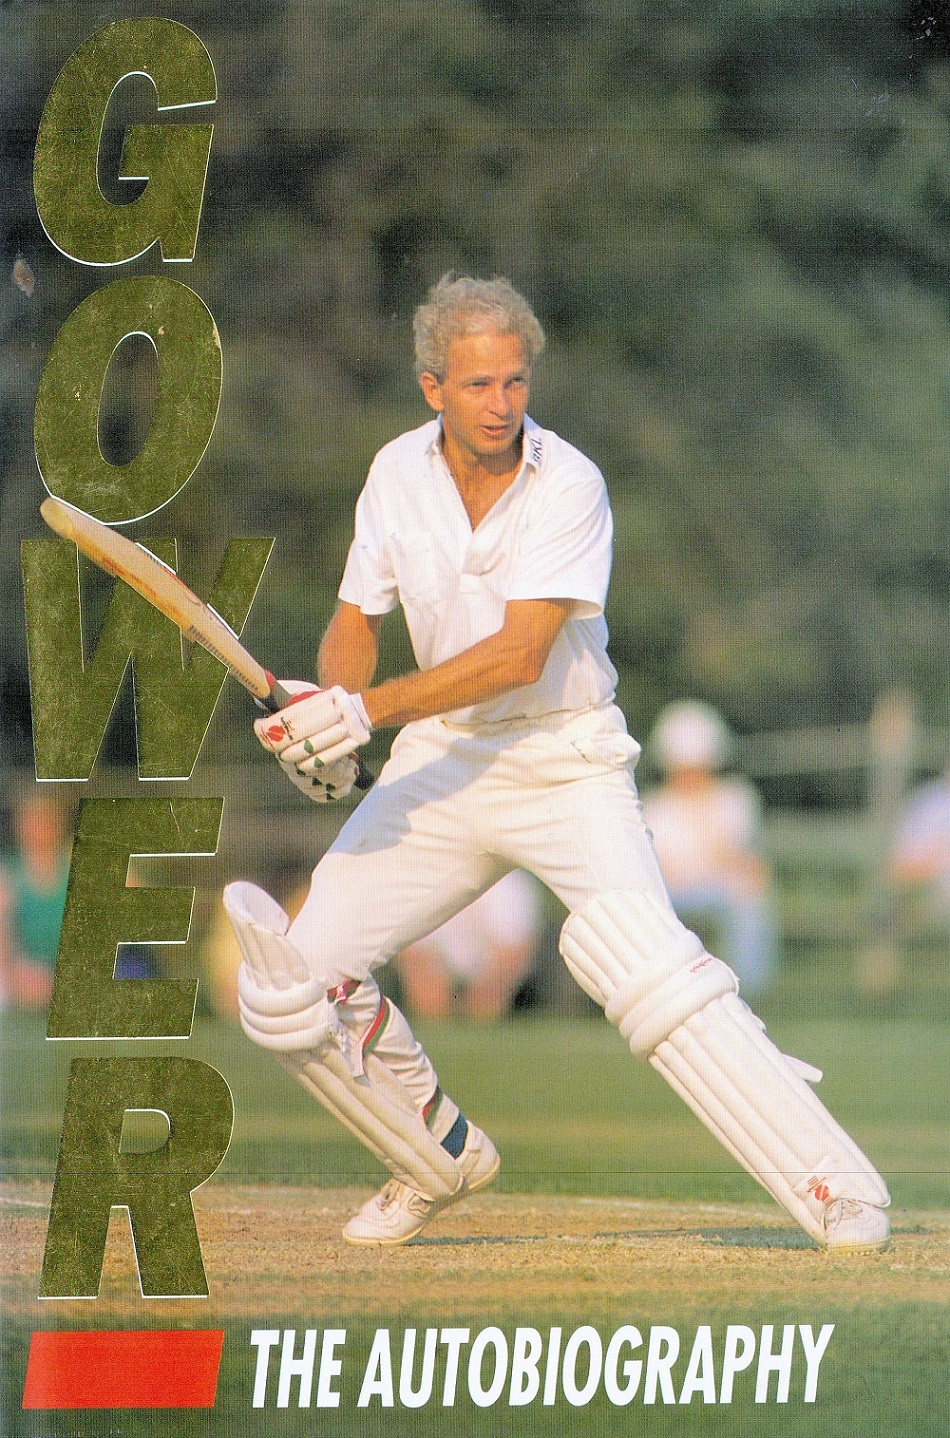 Signed Book David Gower The Autobiography Second Edition 1992 Hardback Book Signed by David Gower on